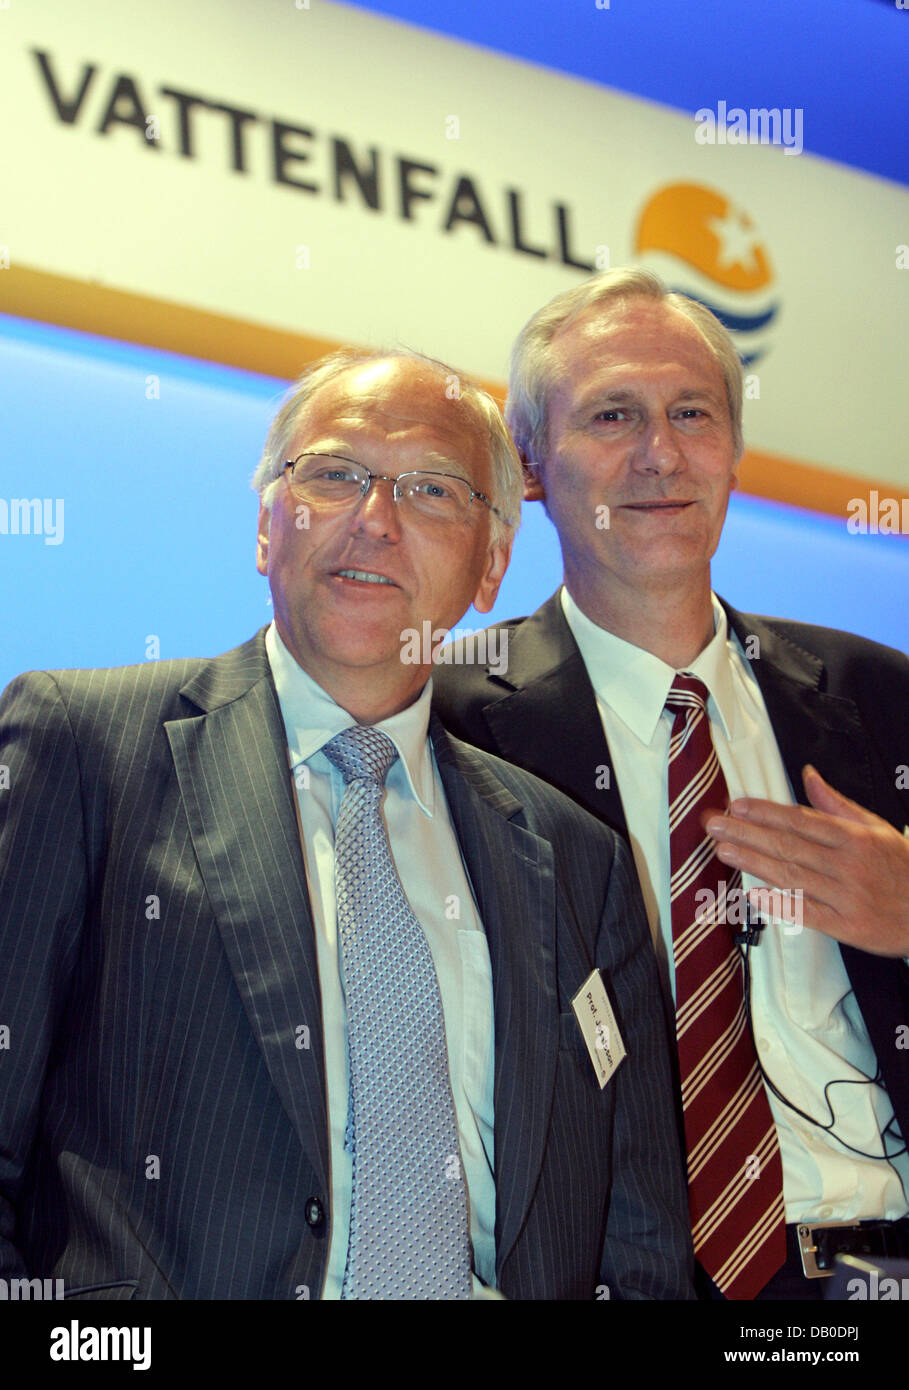 New spokesperson of the 'Vattenfall Europe' board, Hans-Juergen Cramer (R), and the CEO of the Swedish power company, Lars G. Josefsson, are pictured on the podium prior to the general meeting in Berlin, Germany, 09 August 2007. Photo: Rainer Jensen Stock Photo